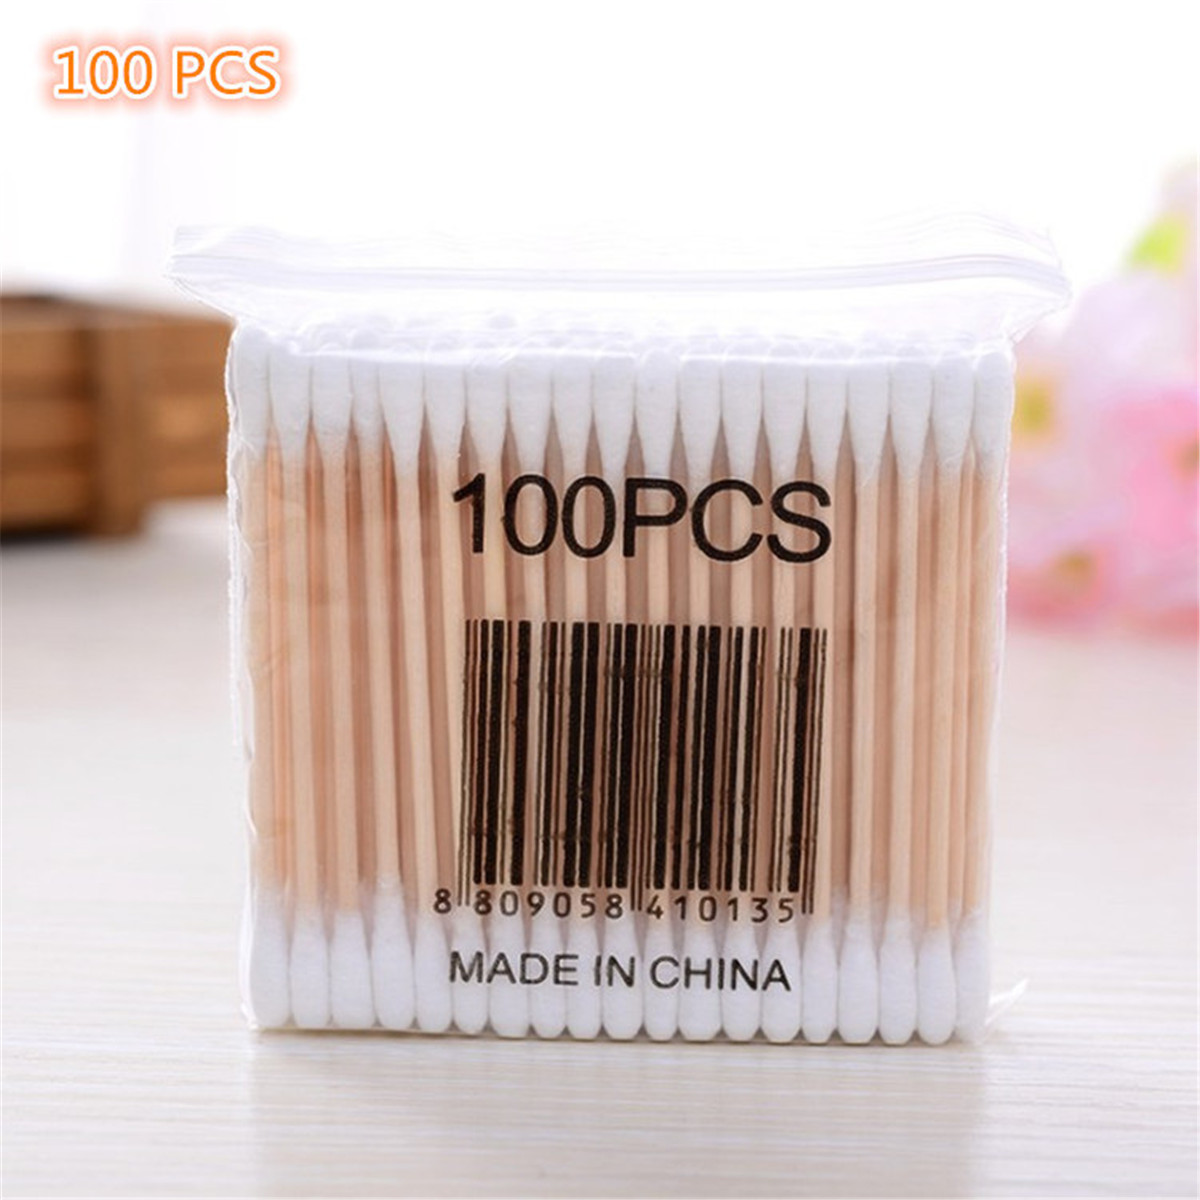 100x-Cotton-Swabs-Swab-Applicator-Q-Tips-Double-Head-Wooden-Stick-Cleaning-Tools-1582736-1